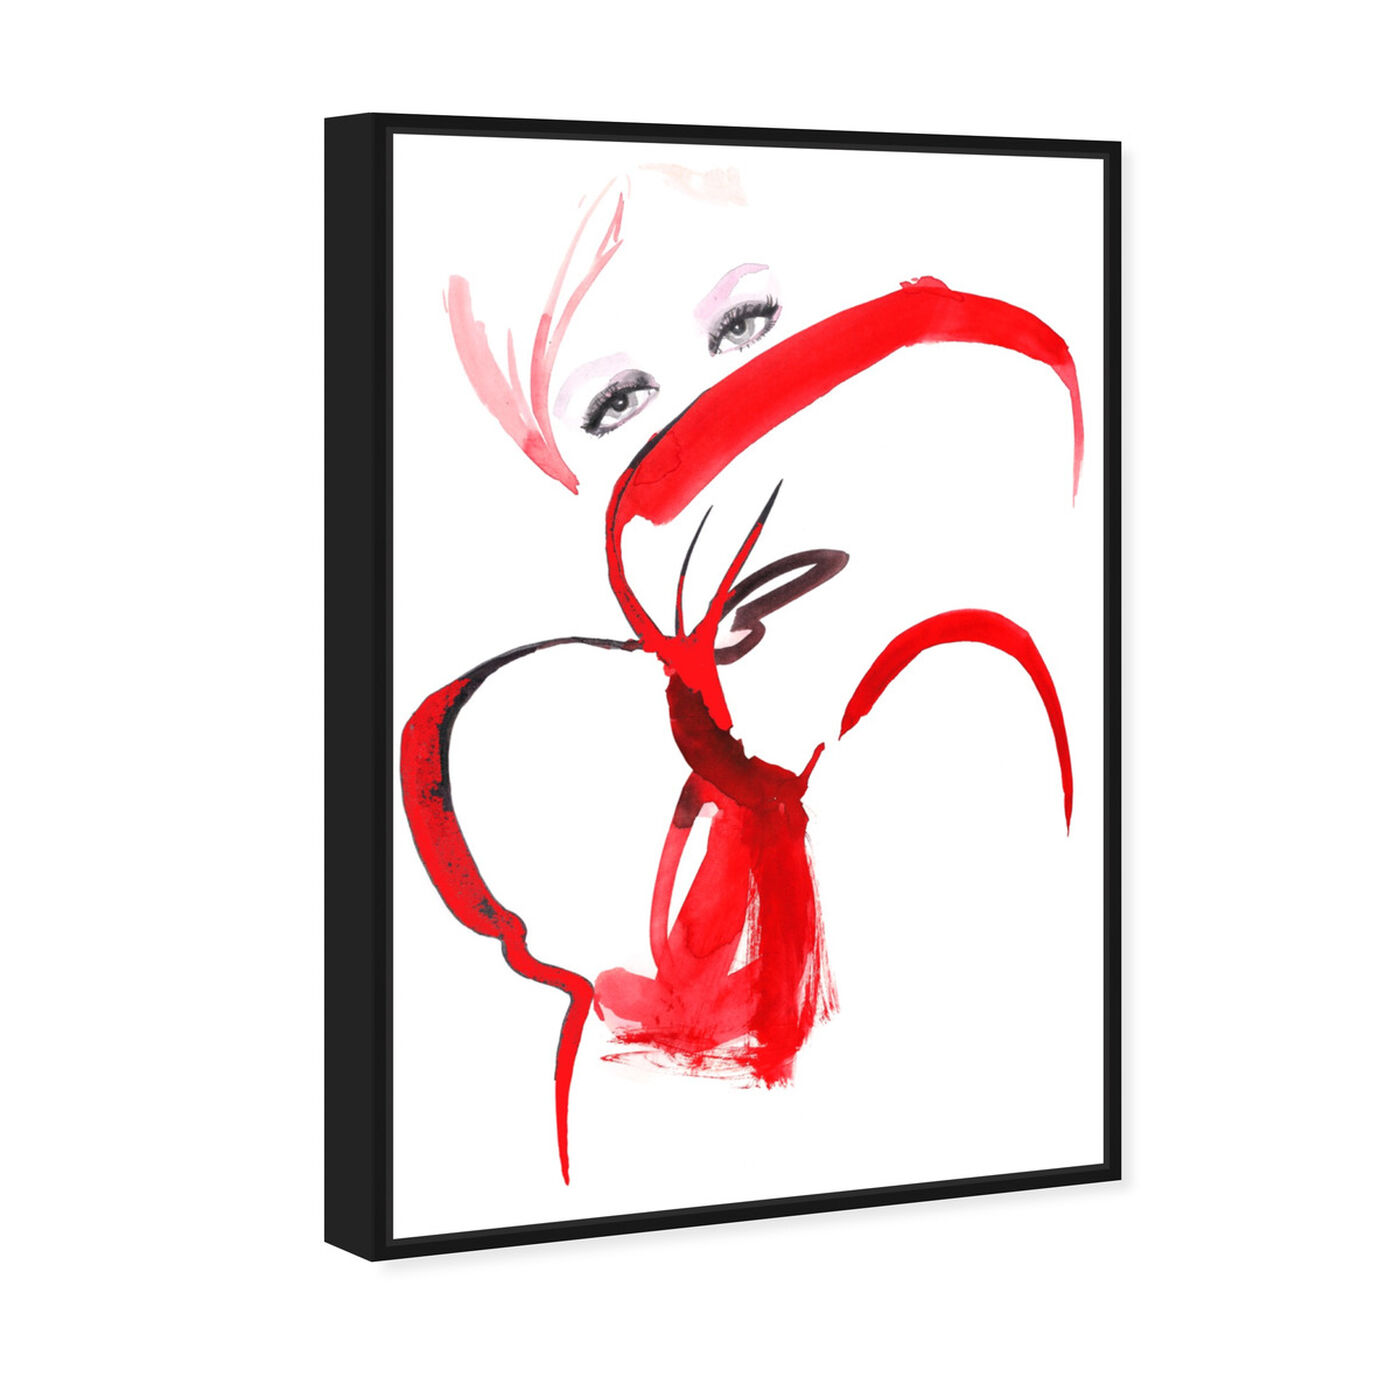 Angled view of Girl With a Red Bow - Gill Bay featuring fashion and glam and portraits art.